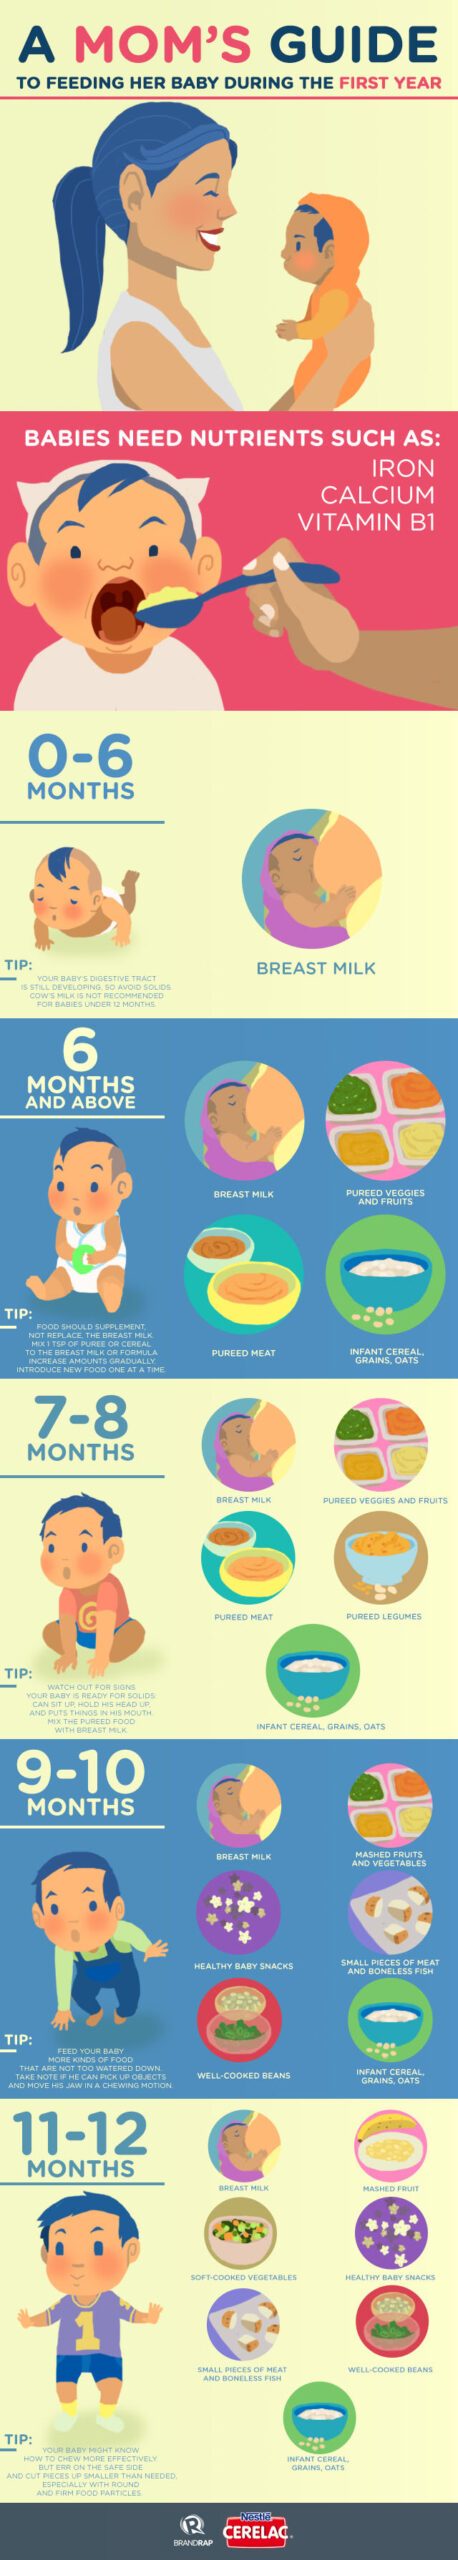 A mom’s guide to feeding her baby during the first year